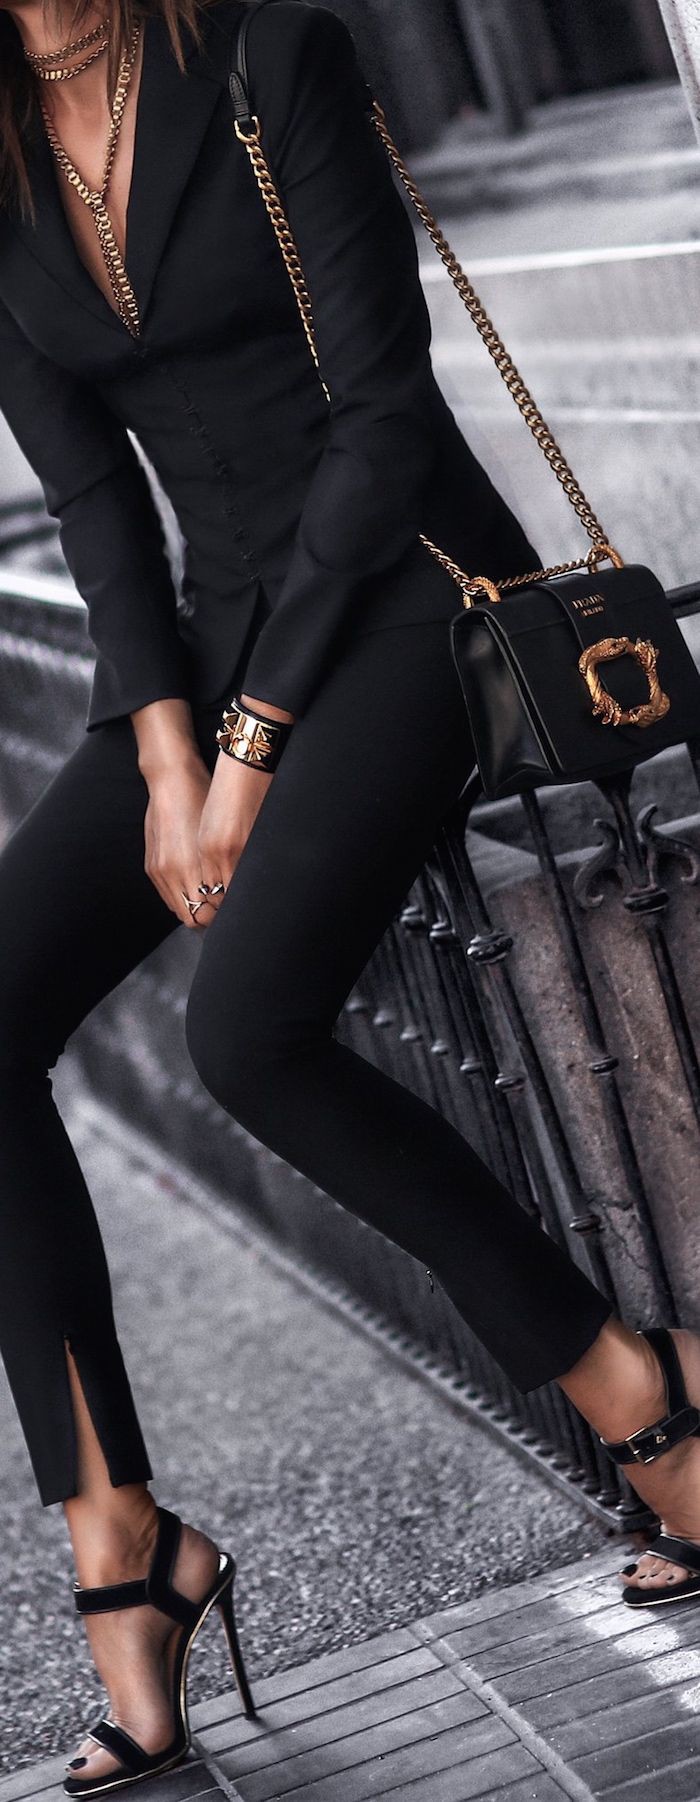 Black outfit gold accessories, fashion accessory | Black On Black Outfit  Ideas | Black Outfit, black outfits, Fashion accessory